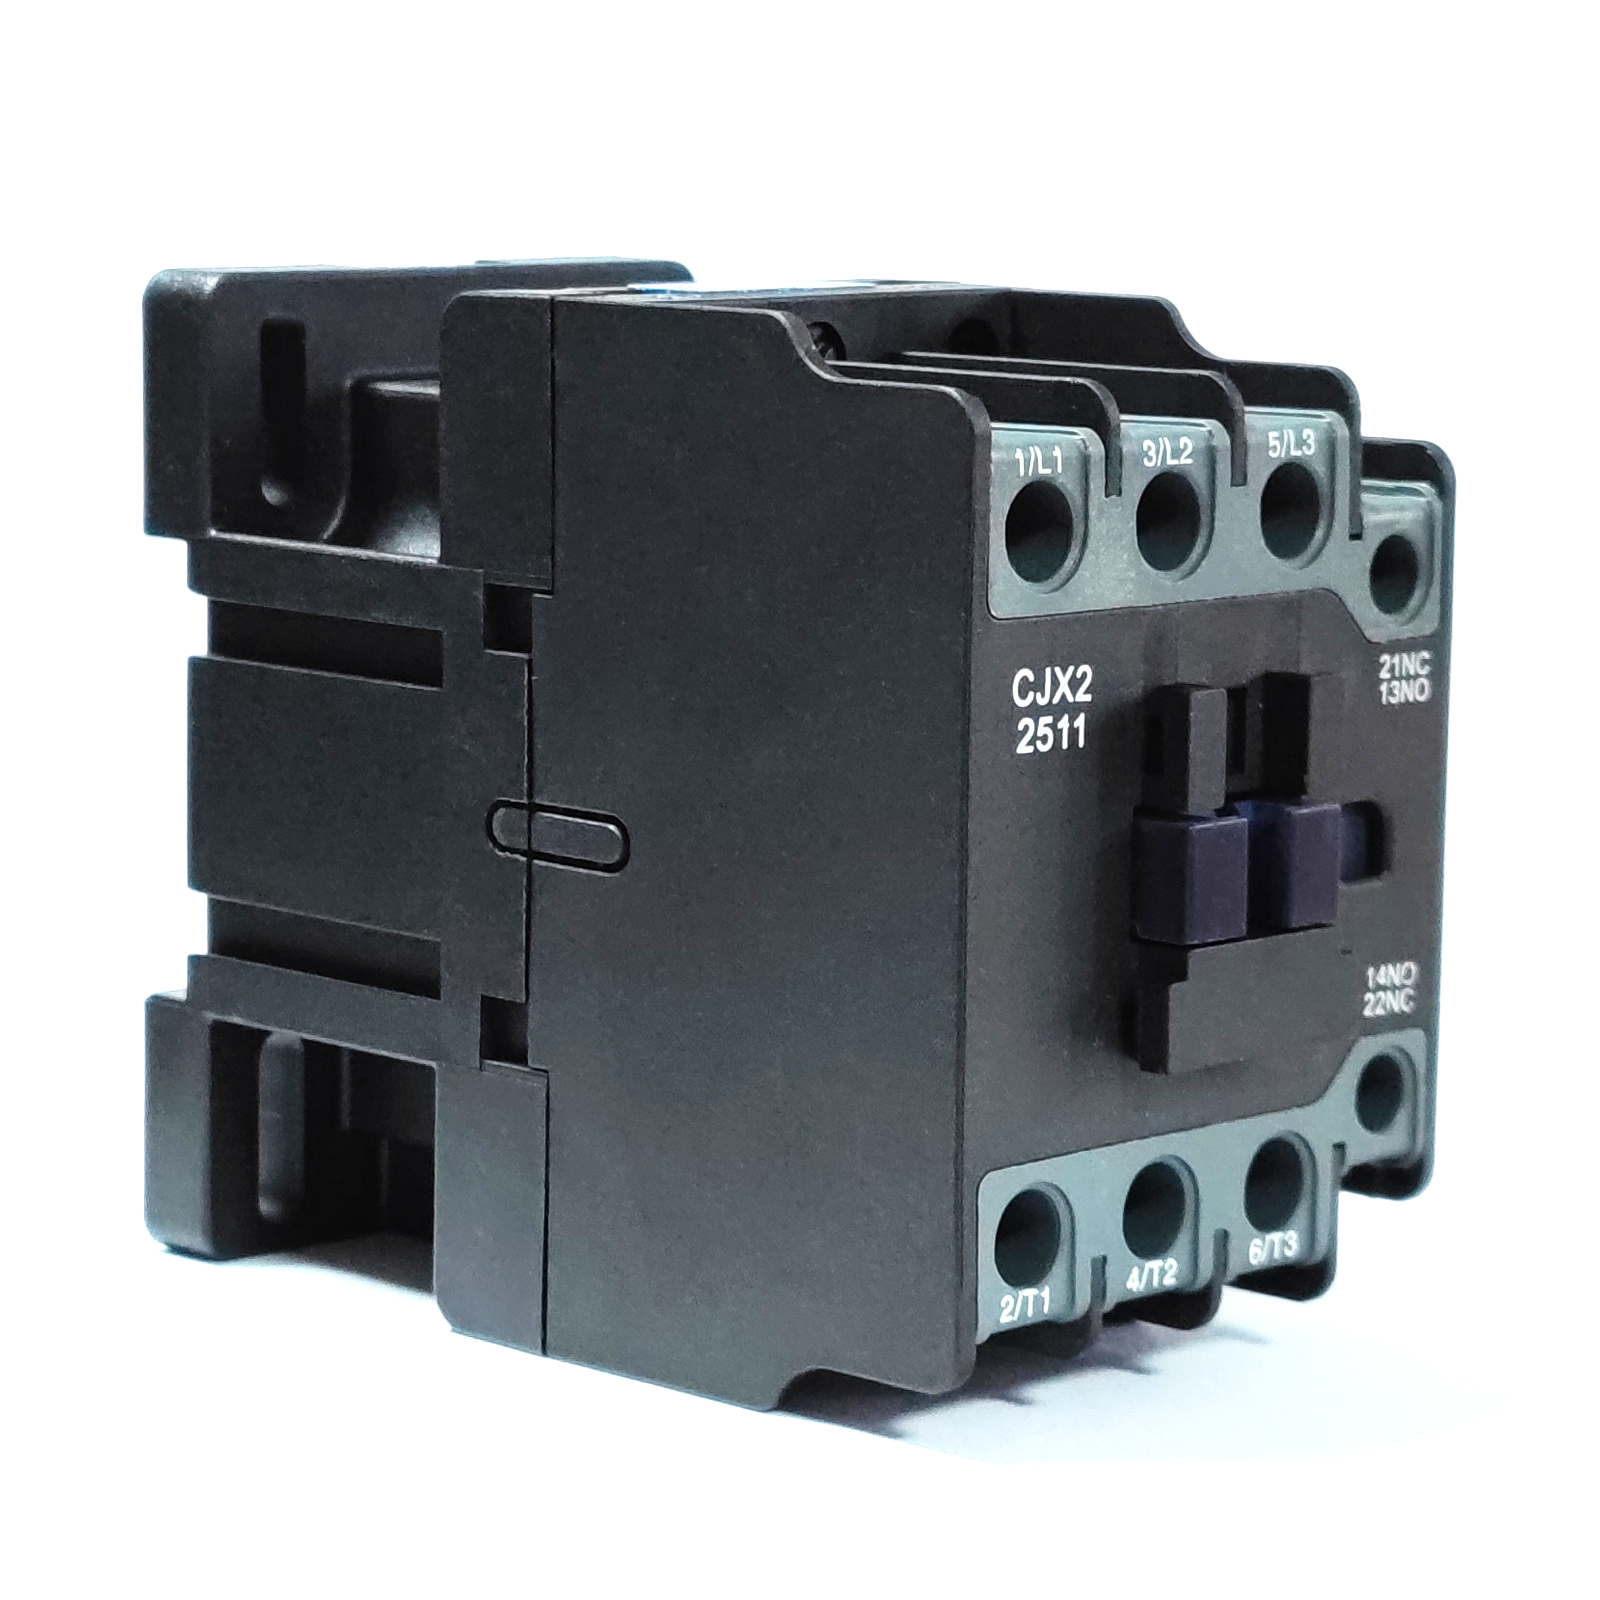 Why does the AC contactor make a buzzing sound?